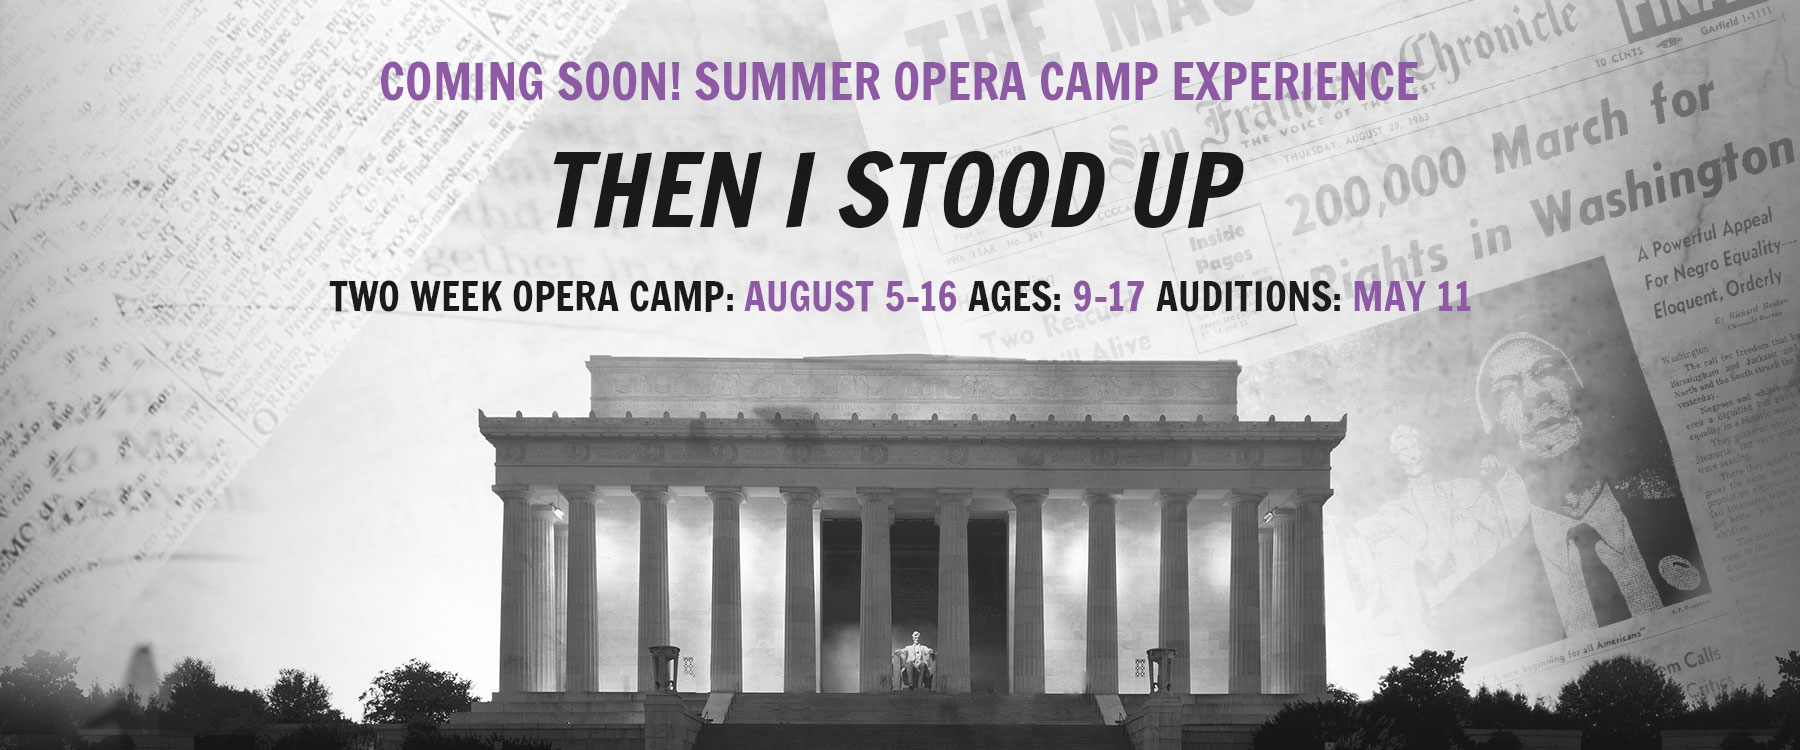 Auditions announced for 2019 Basie Center Summer Opera Camp Count